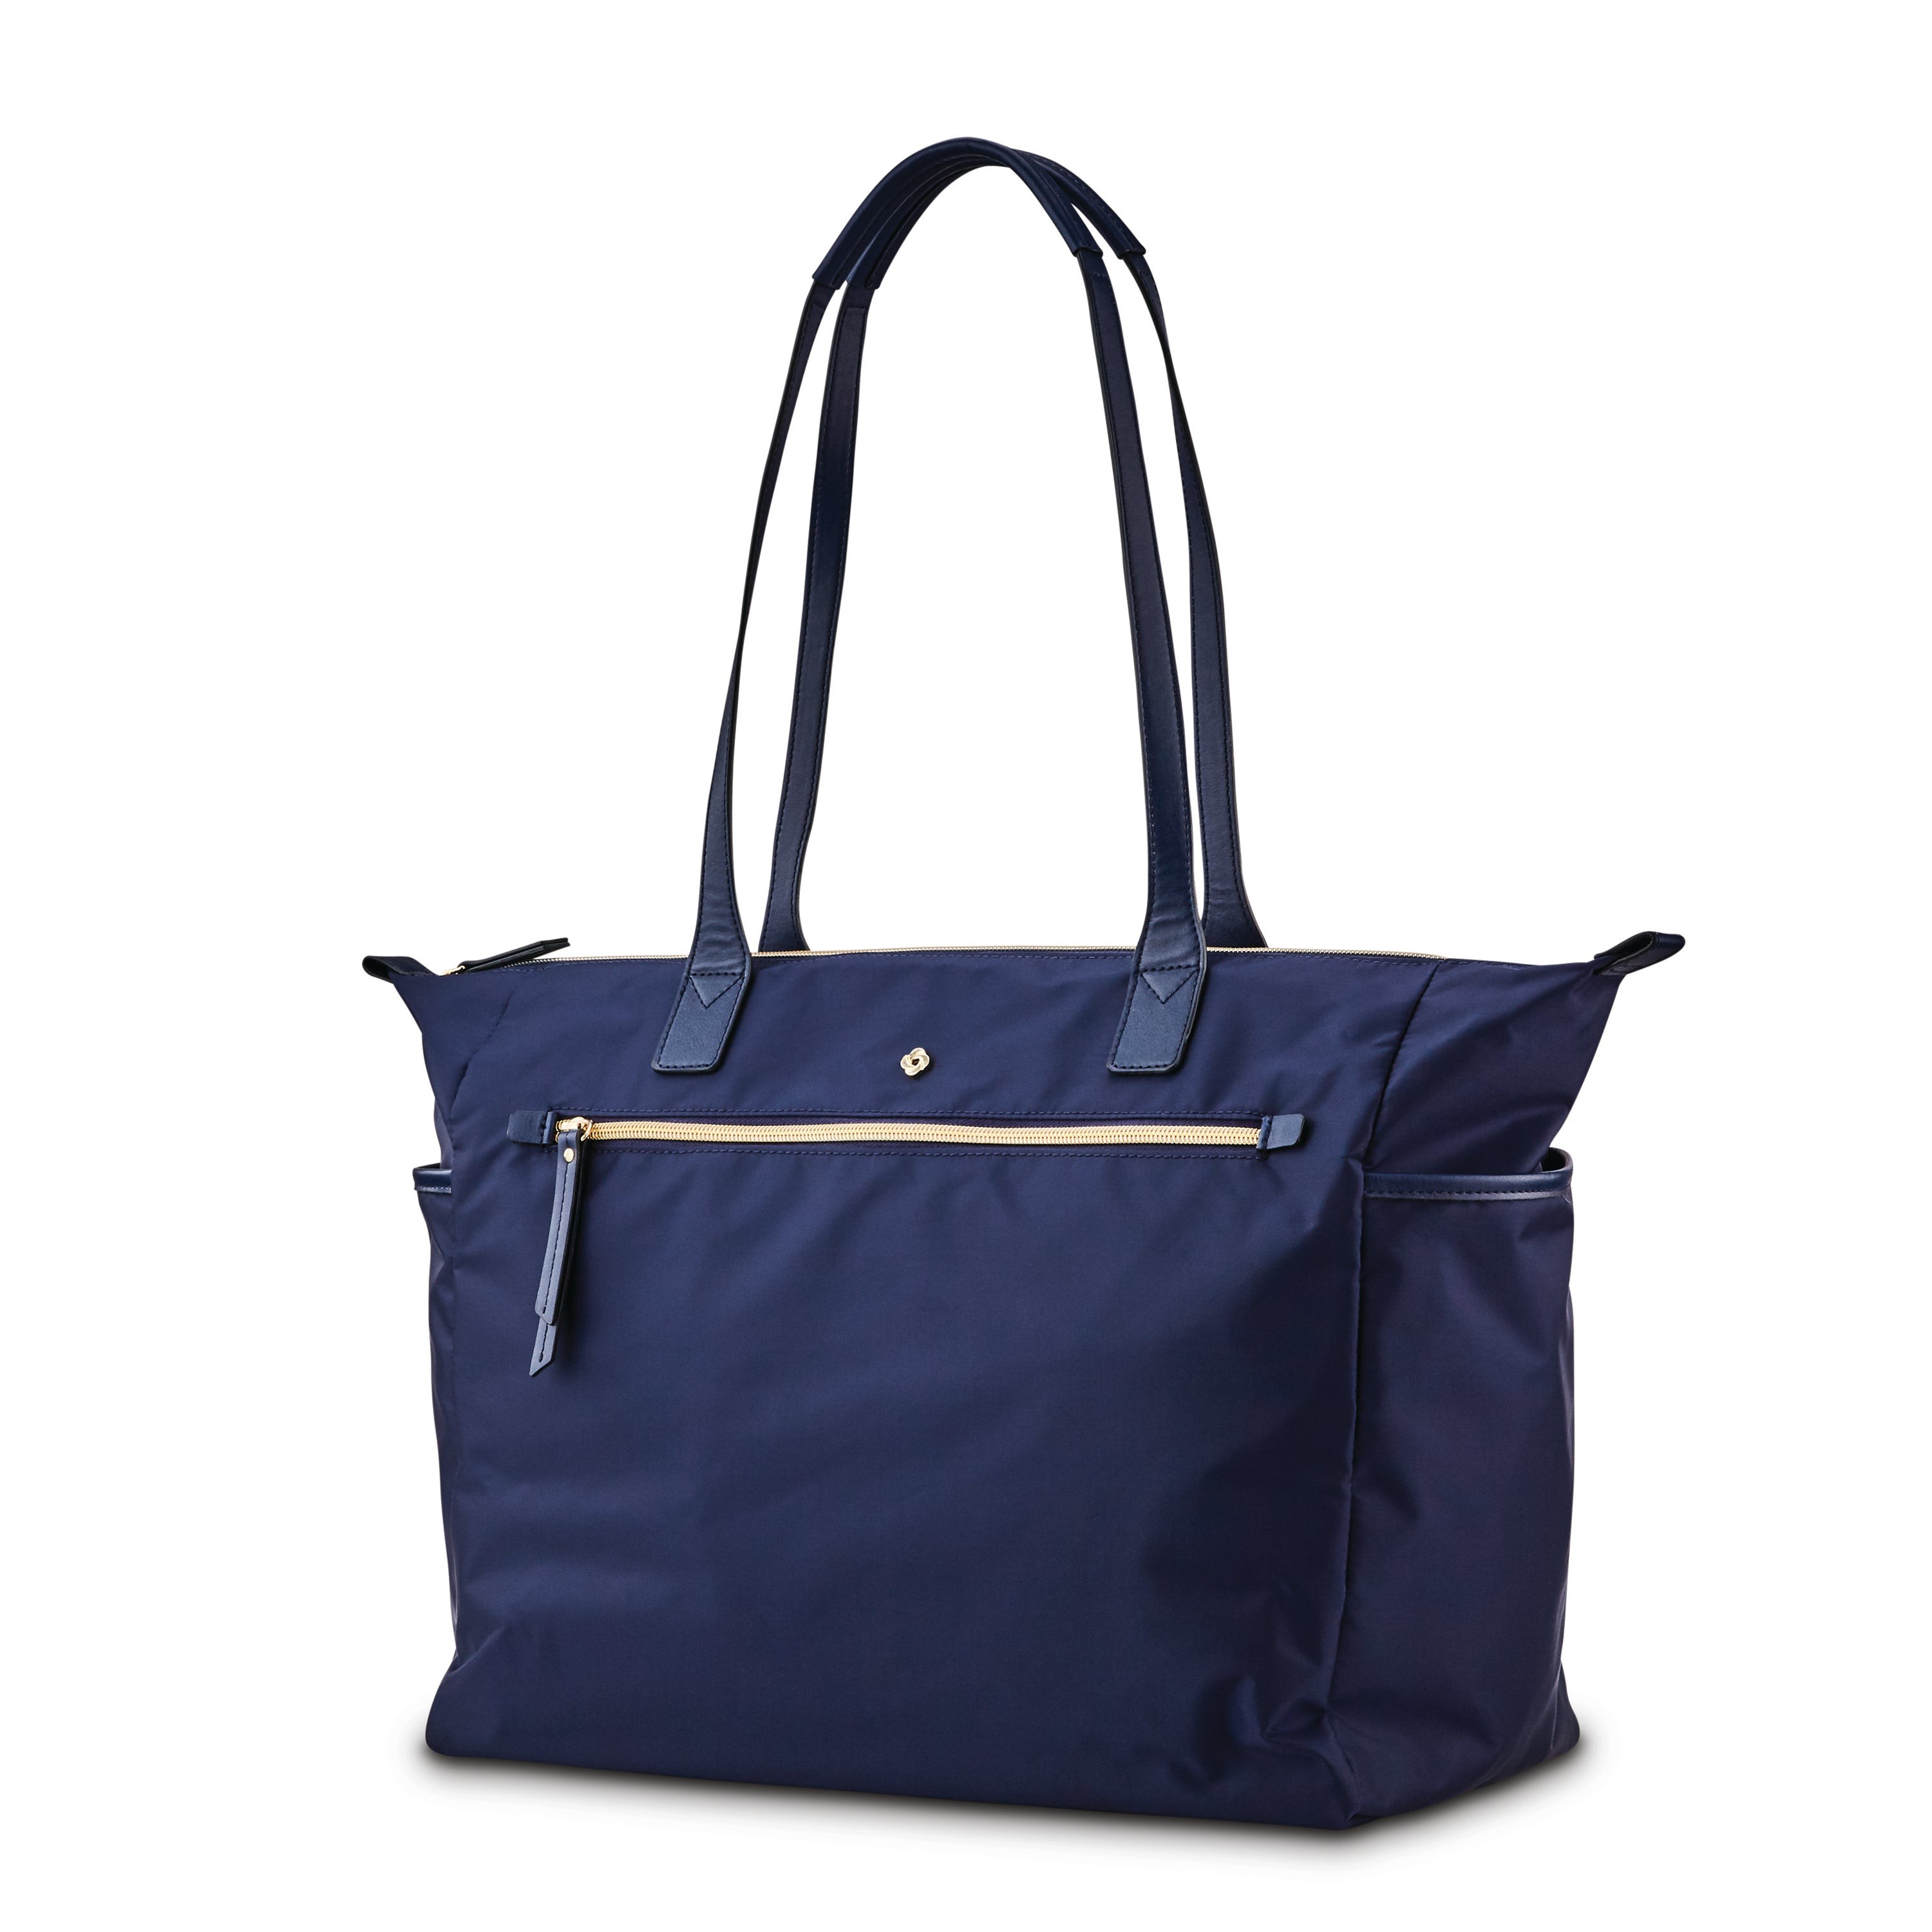 Mobile Solutions Deluxe Carryall Navy